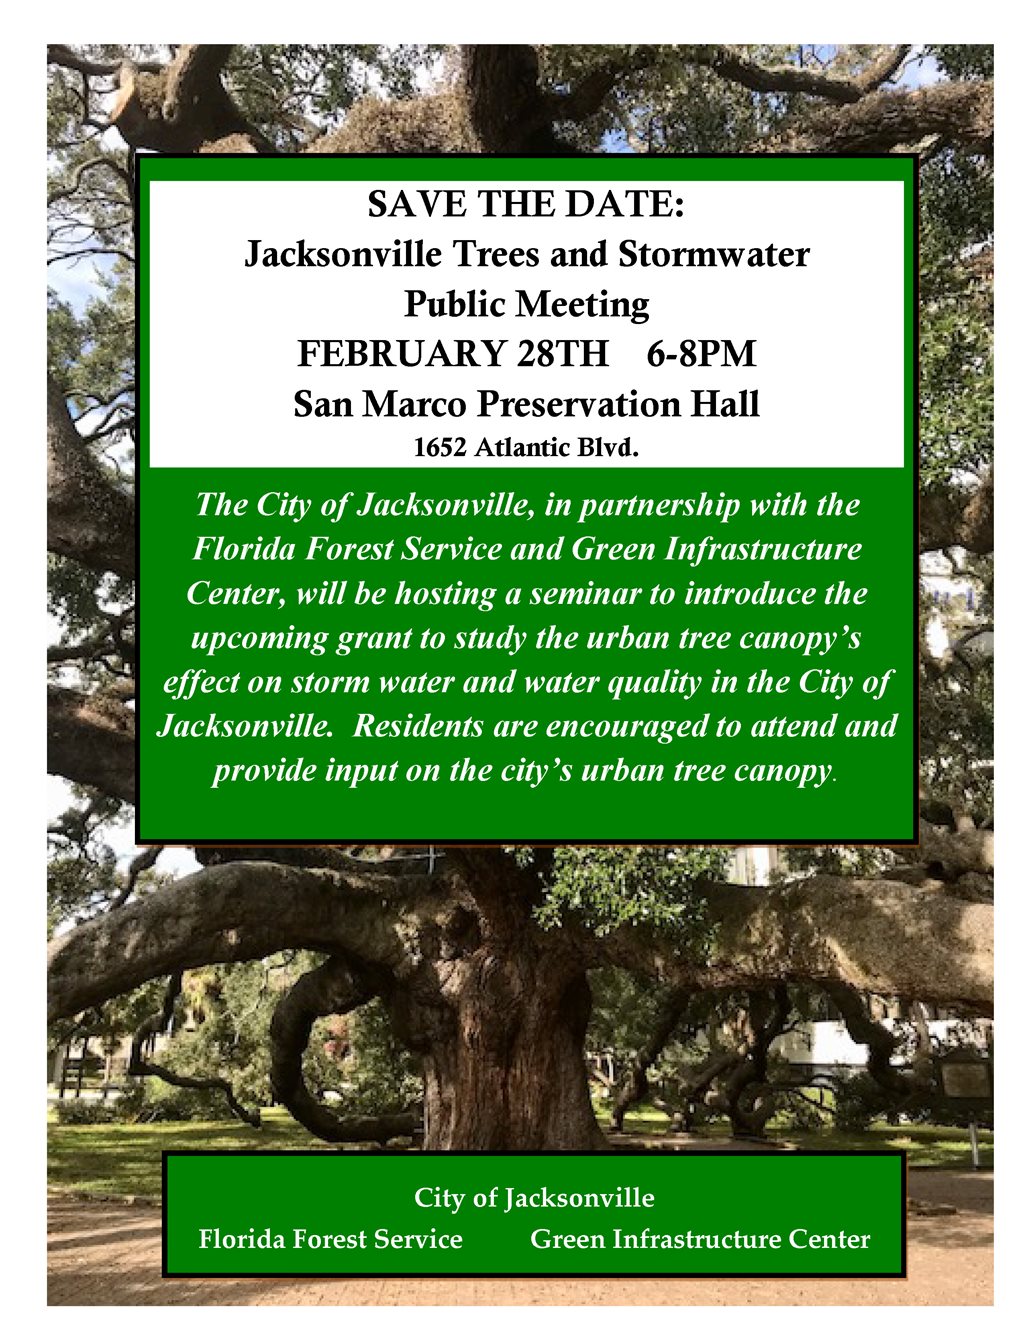 Jacksonville Trees and Stormwater Public Meeting Flyer